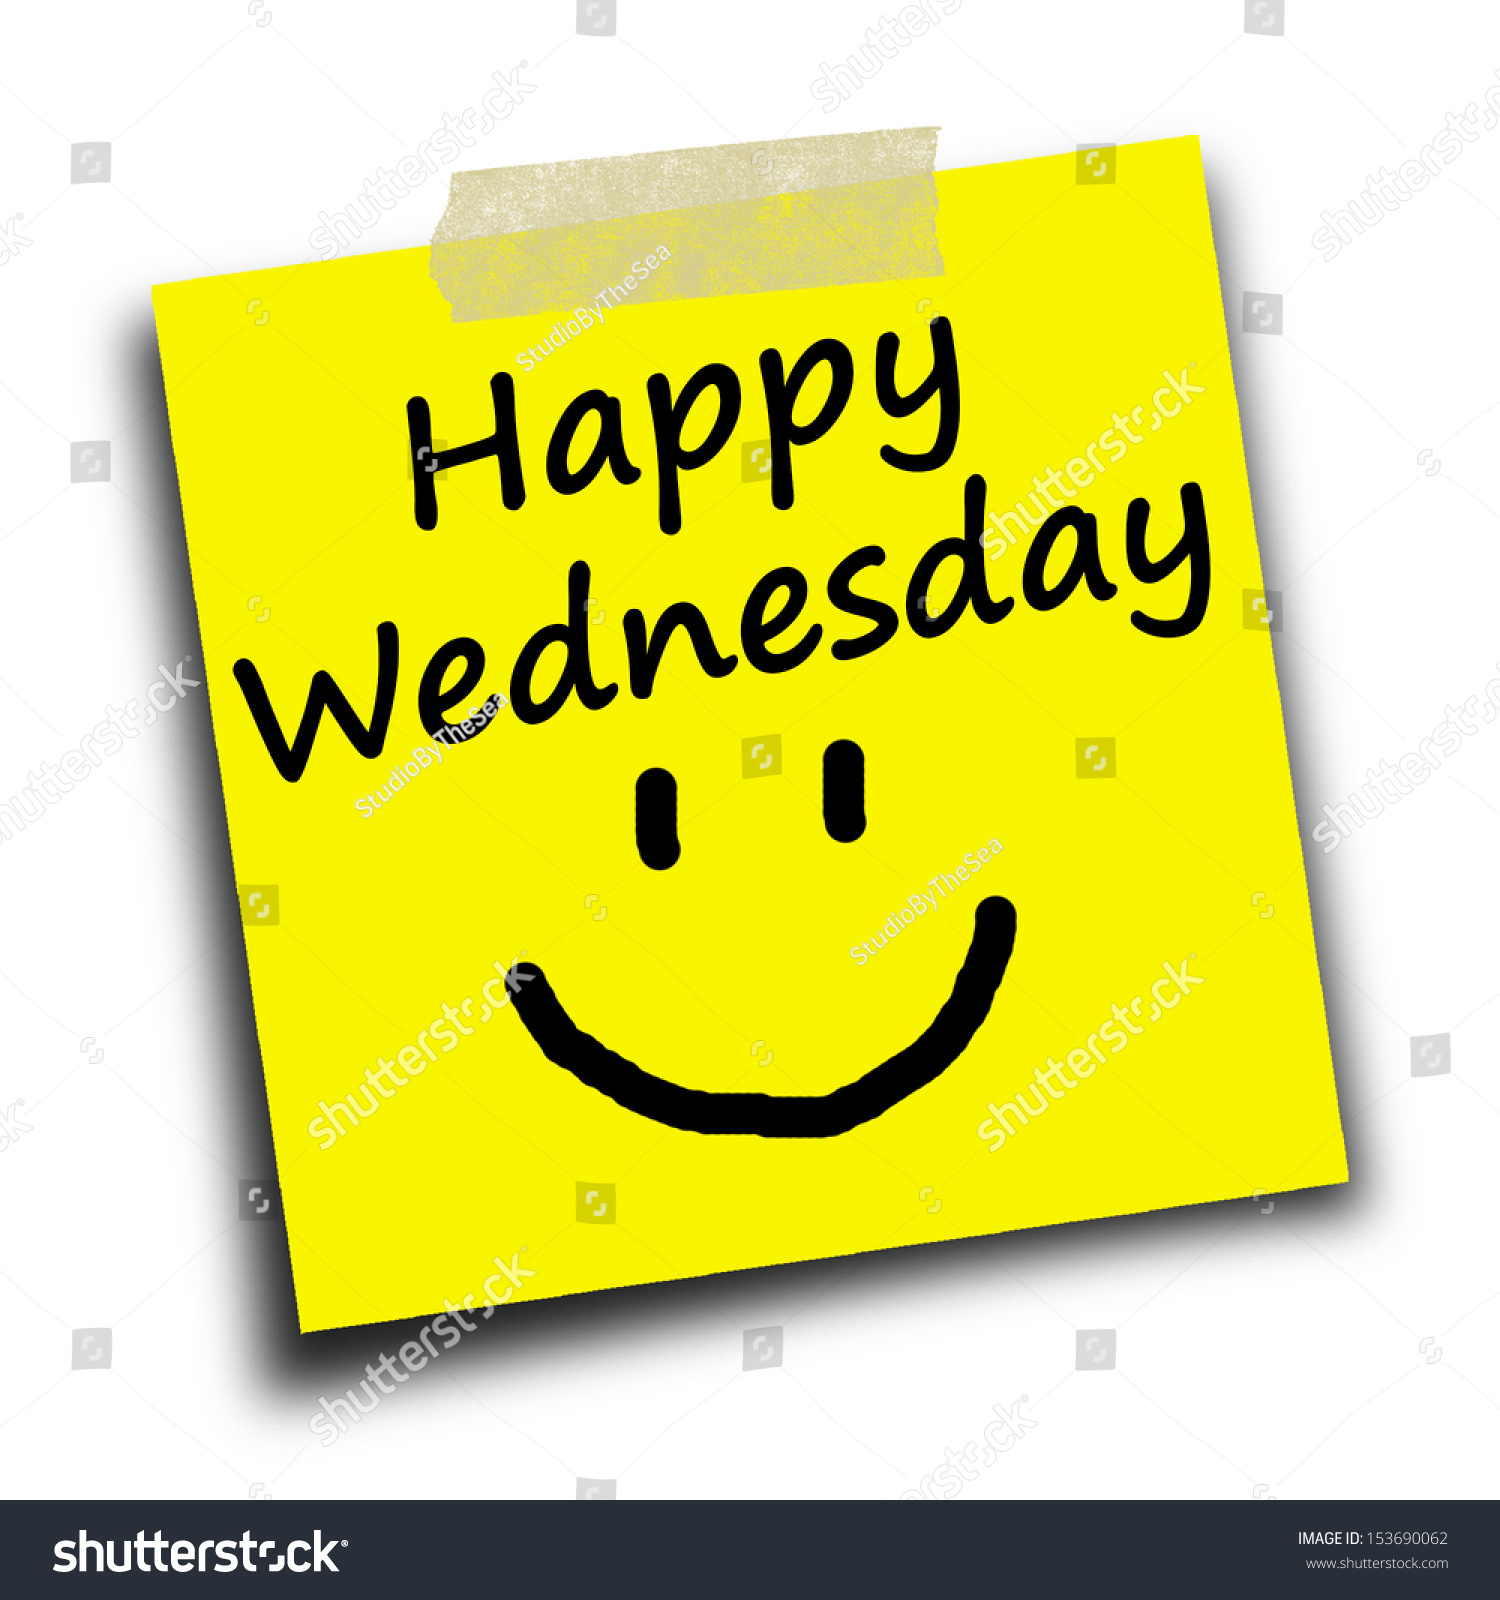 https://image.shutterstock.com/z/stock-photo-text-happy-wednesday-on-yellow-short-note-paper-white-background-153690062.jpg